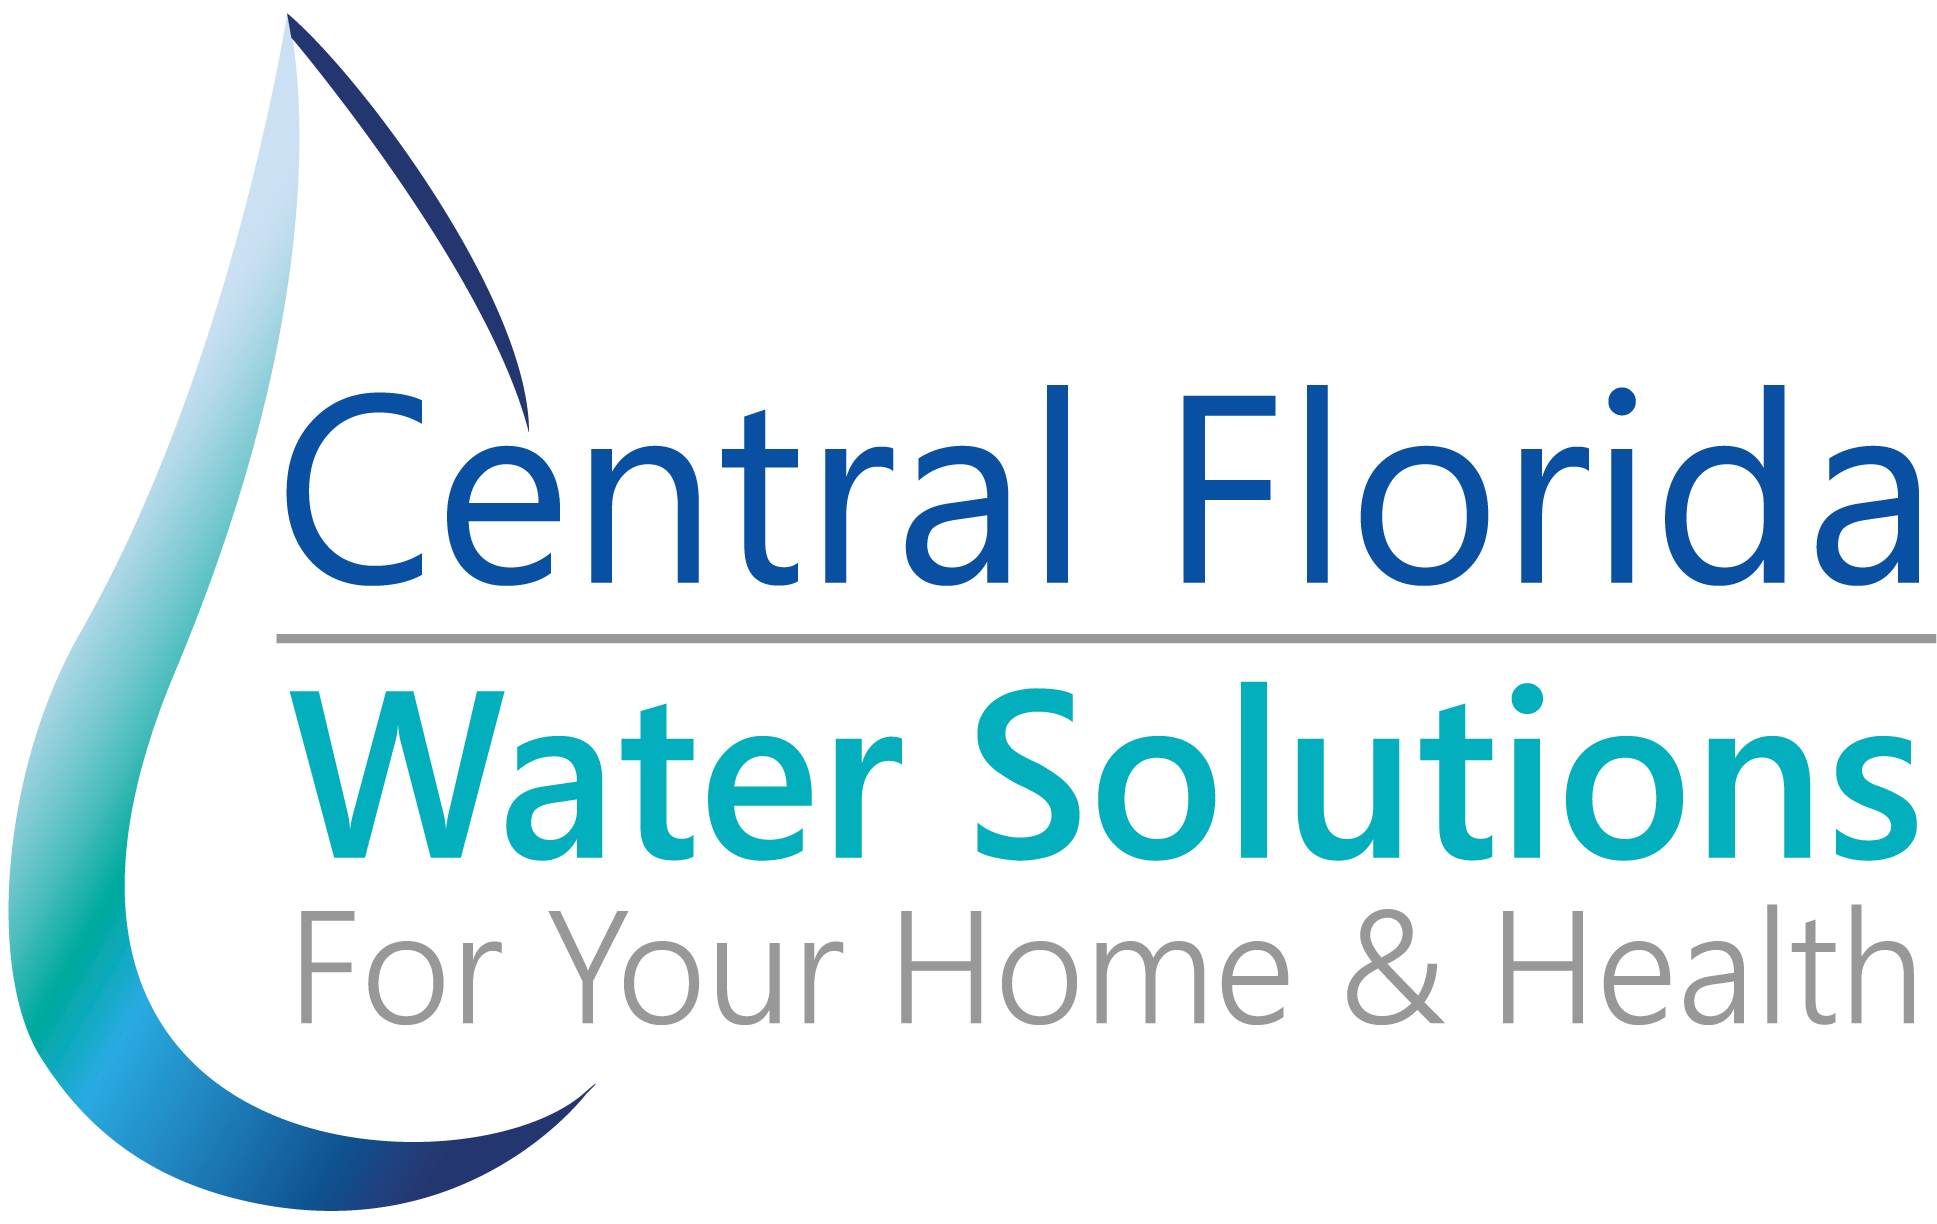 Central Florida Water Solutions